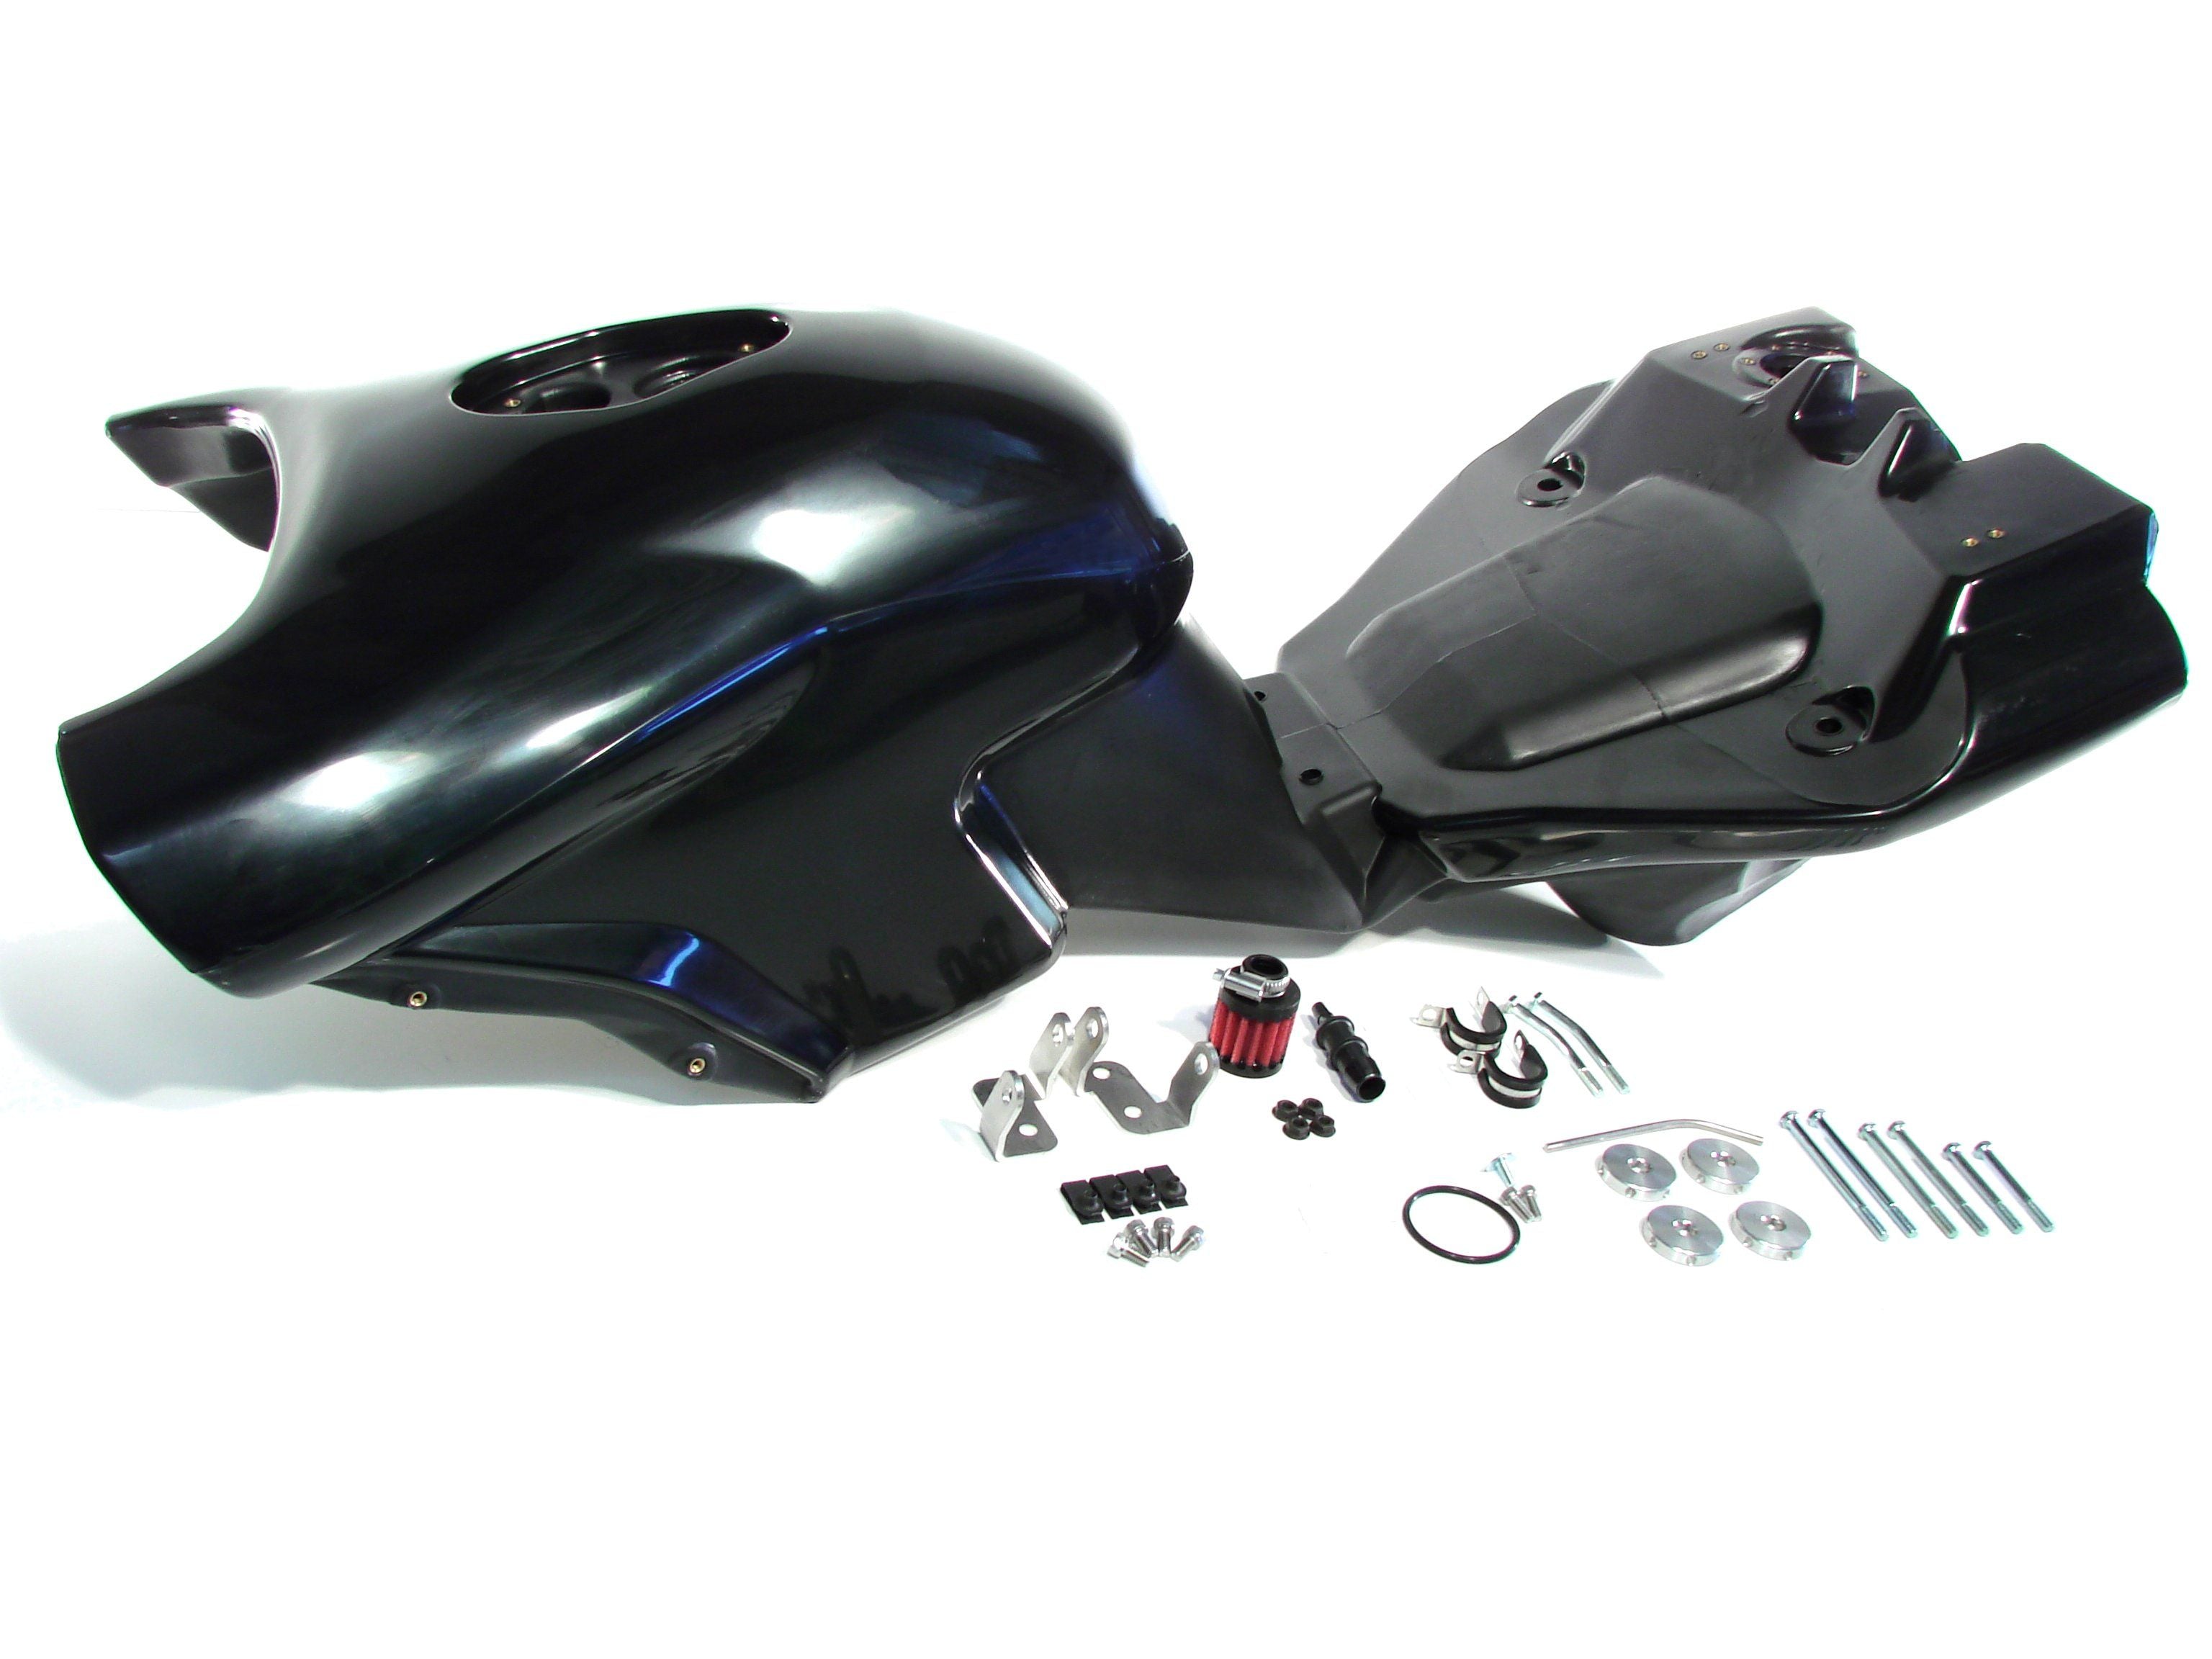 CA Cycleworks - Fuel Tank Kit for Multistrada 1000/1100